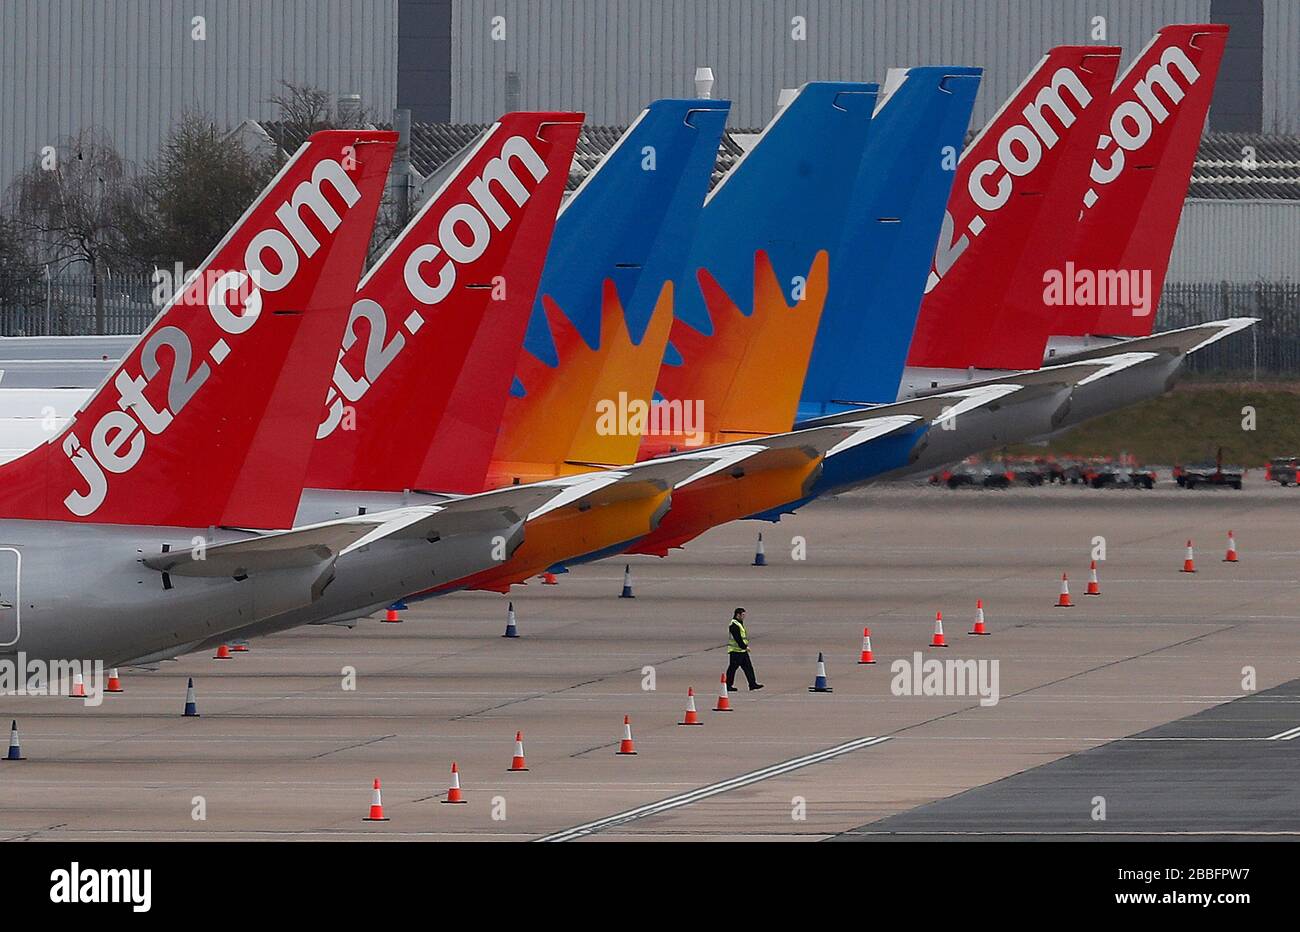 Birmingham, West Midlands, UK. 31st March 2020.  A worker walks under Jet2 aircraft parked on the tarmac at Birmingham Airport during the Coronavirus pandemic lockdown. Credit Darren Staples/Alamy Live News. Stock Photo